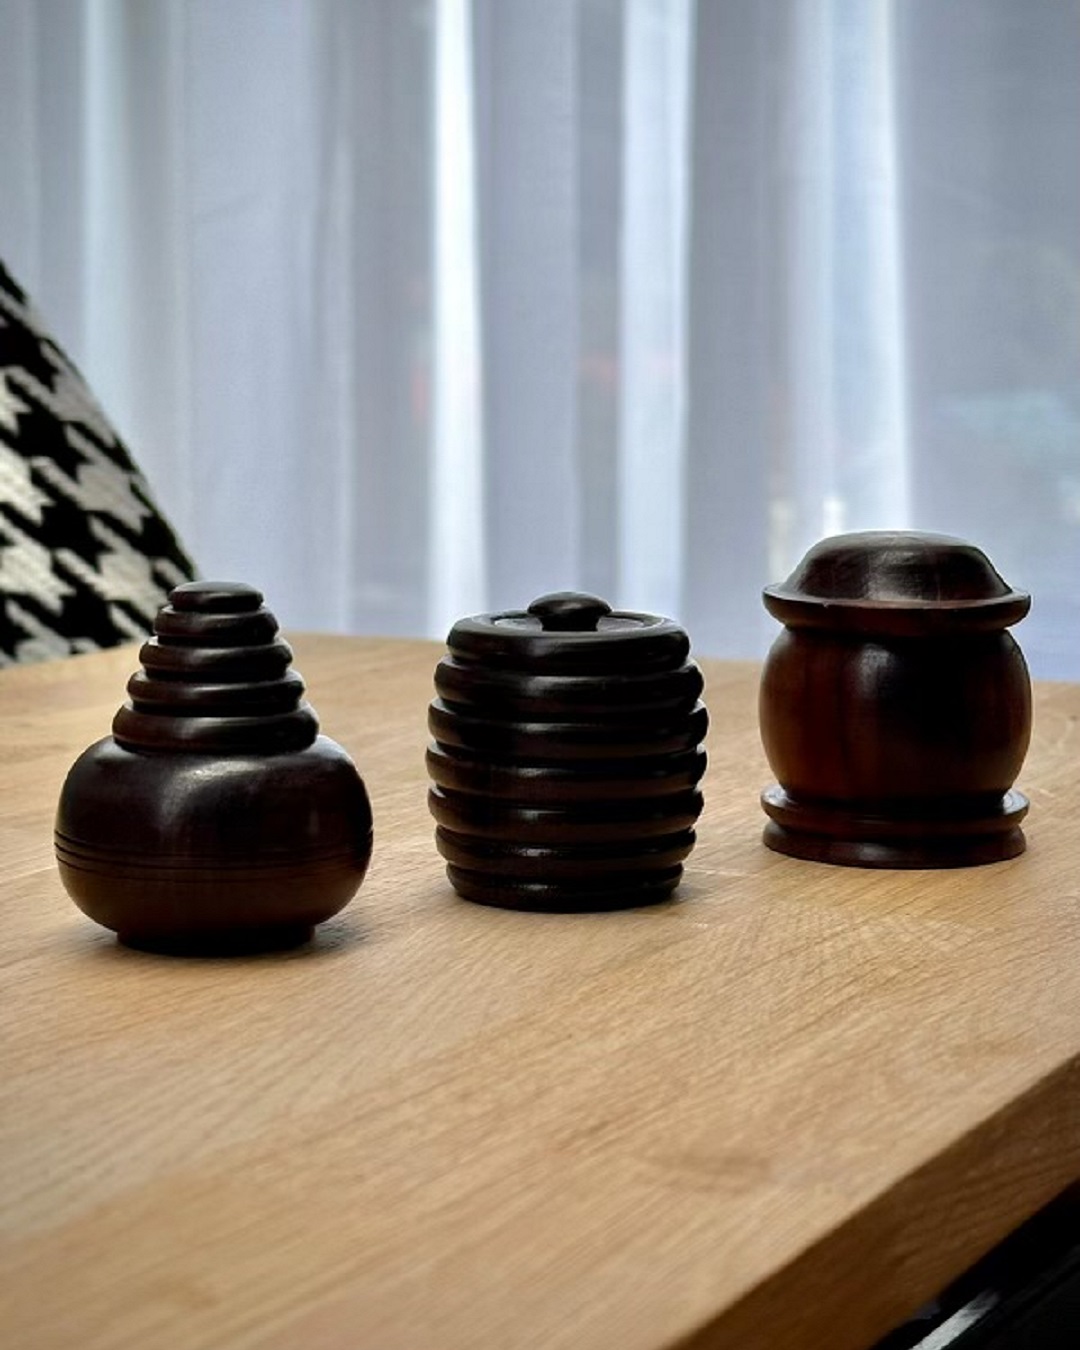 Wooden containers hand woven on table